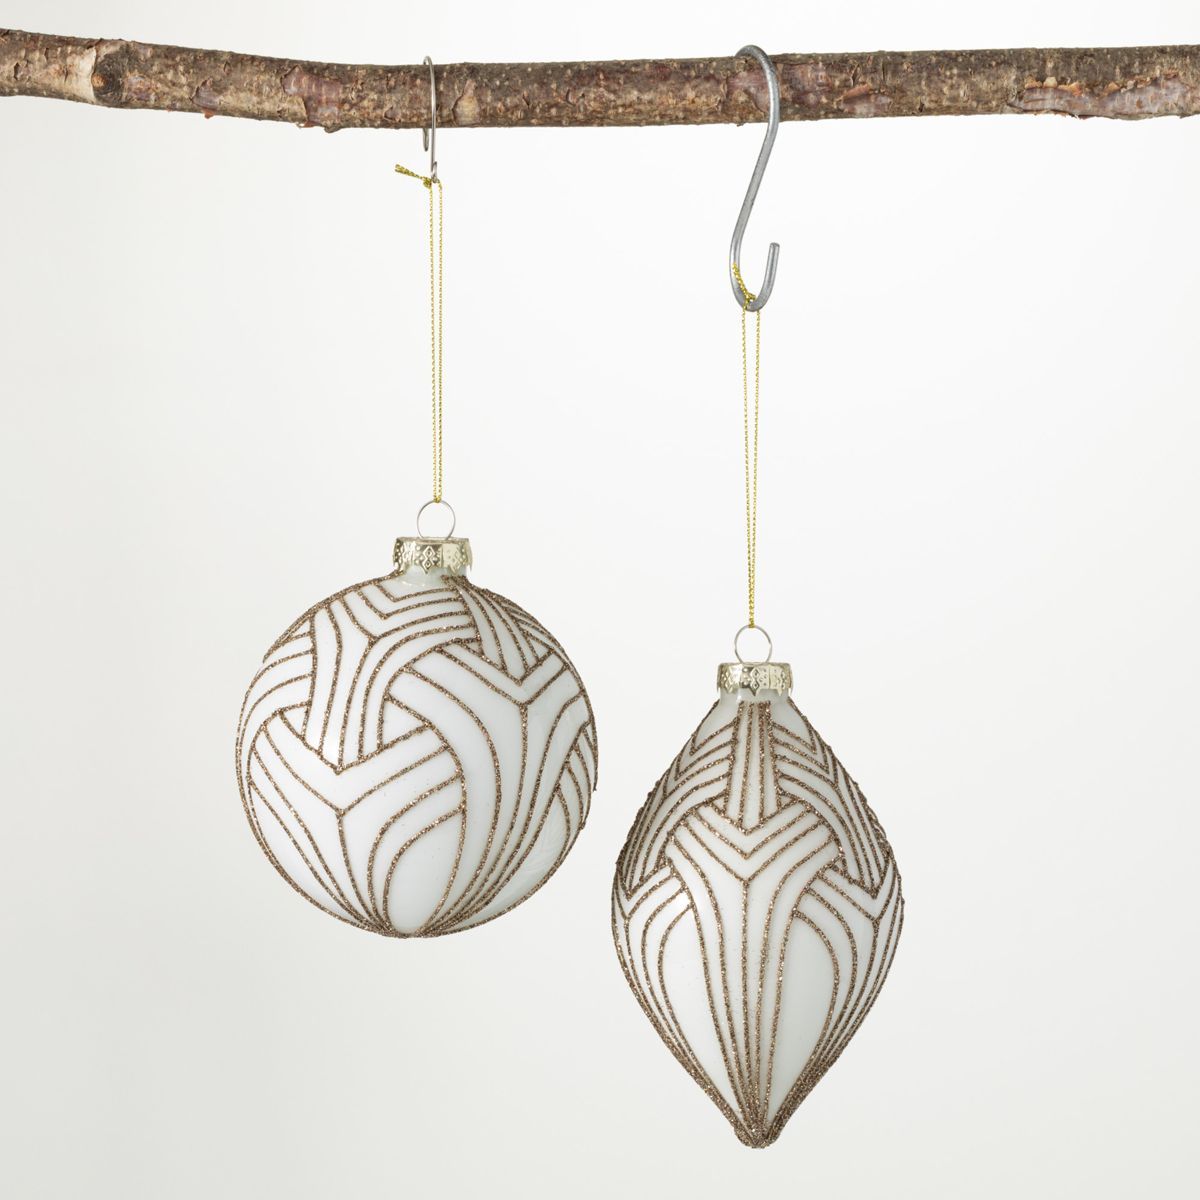 5.75"H and 4.5"H Sullivans Art Deco Gold Ball Ornaments - Set of 2, White Christmas Ornaments | Target